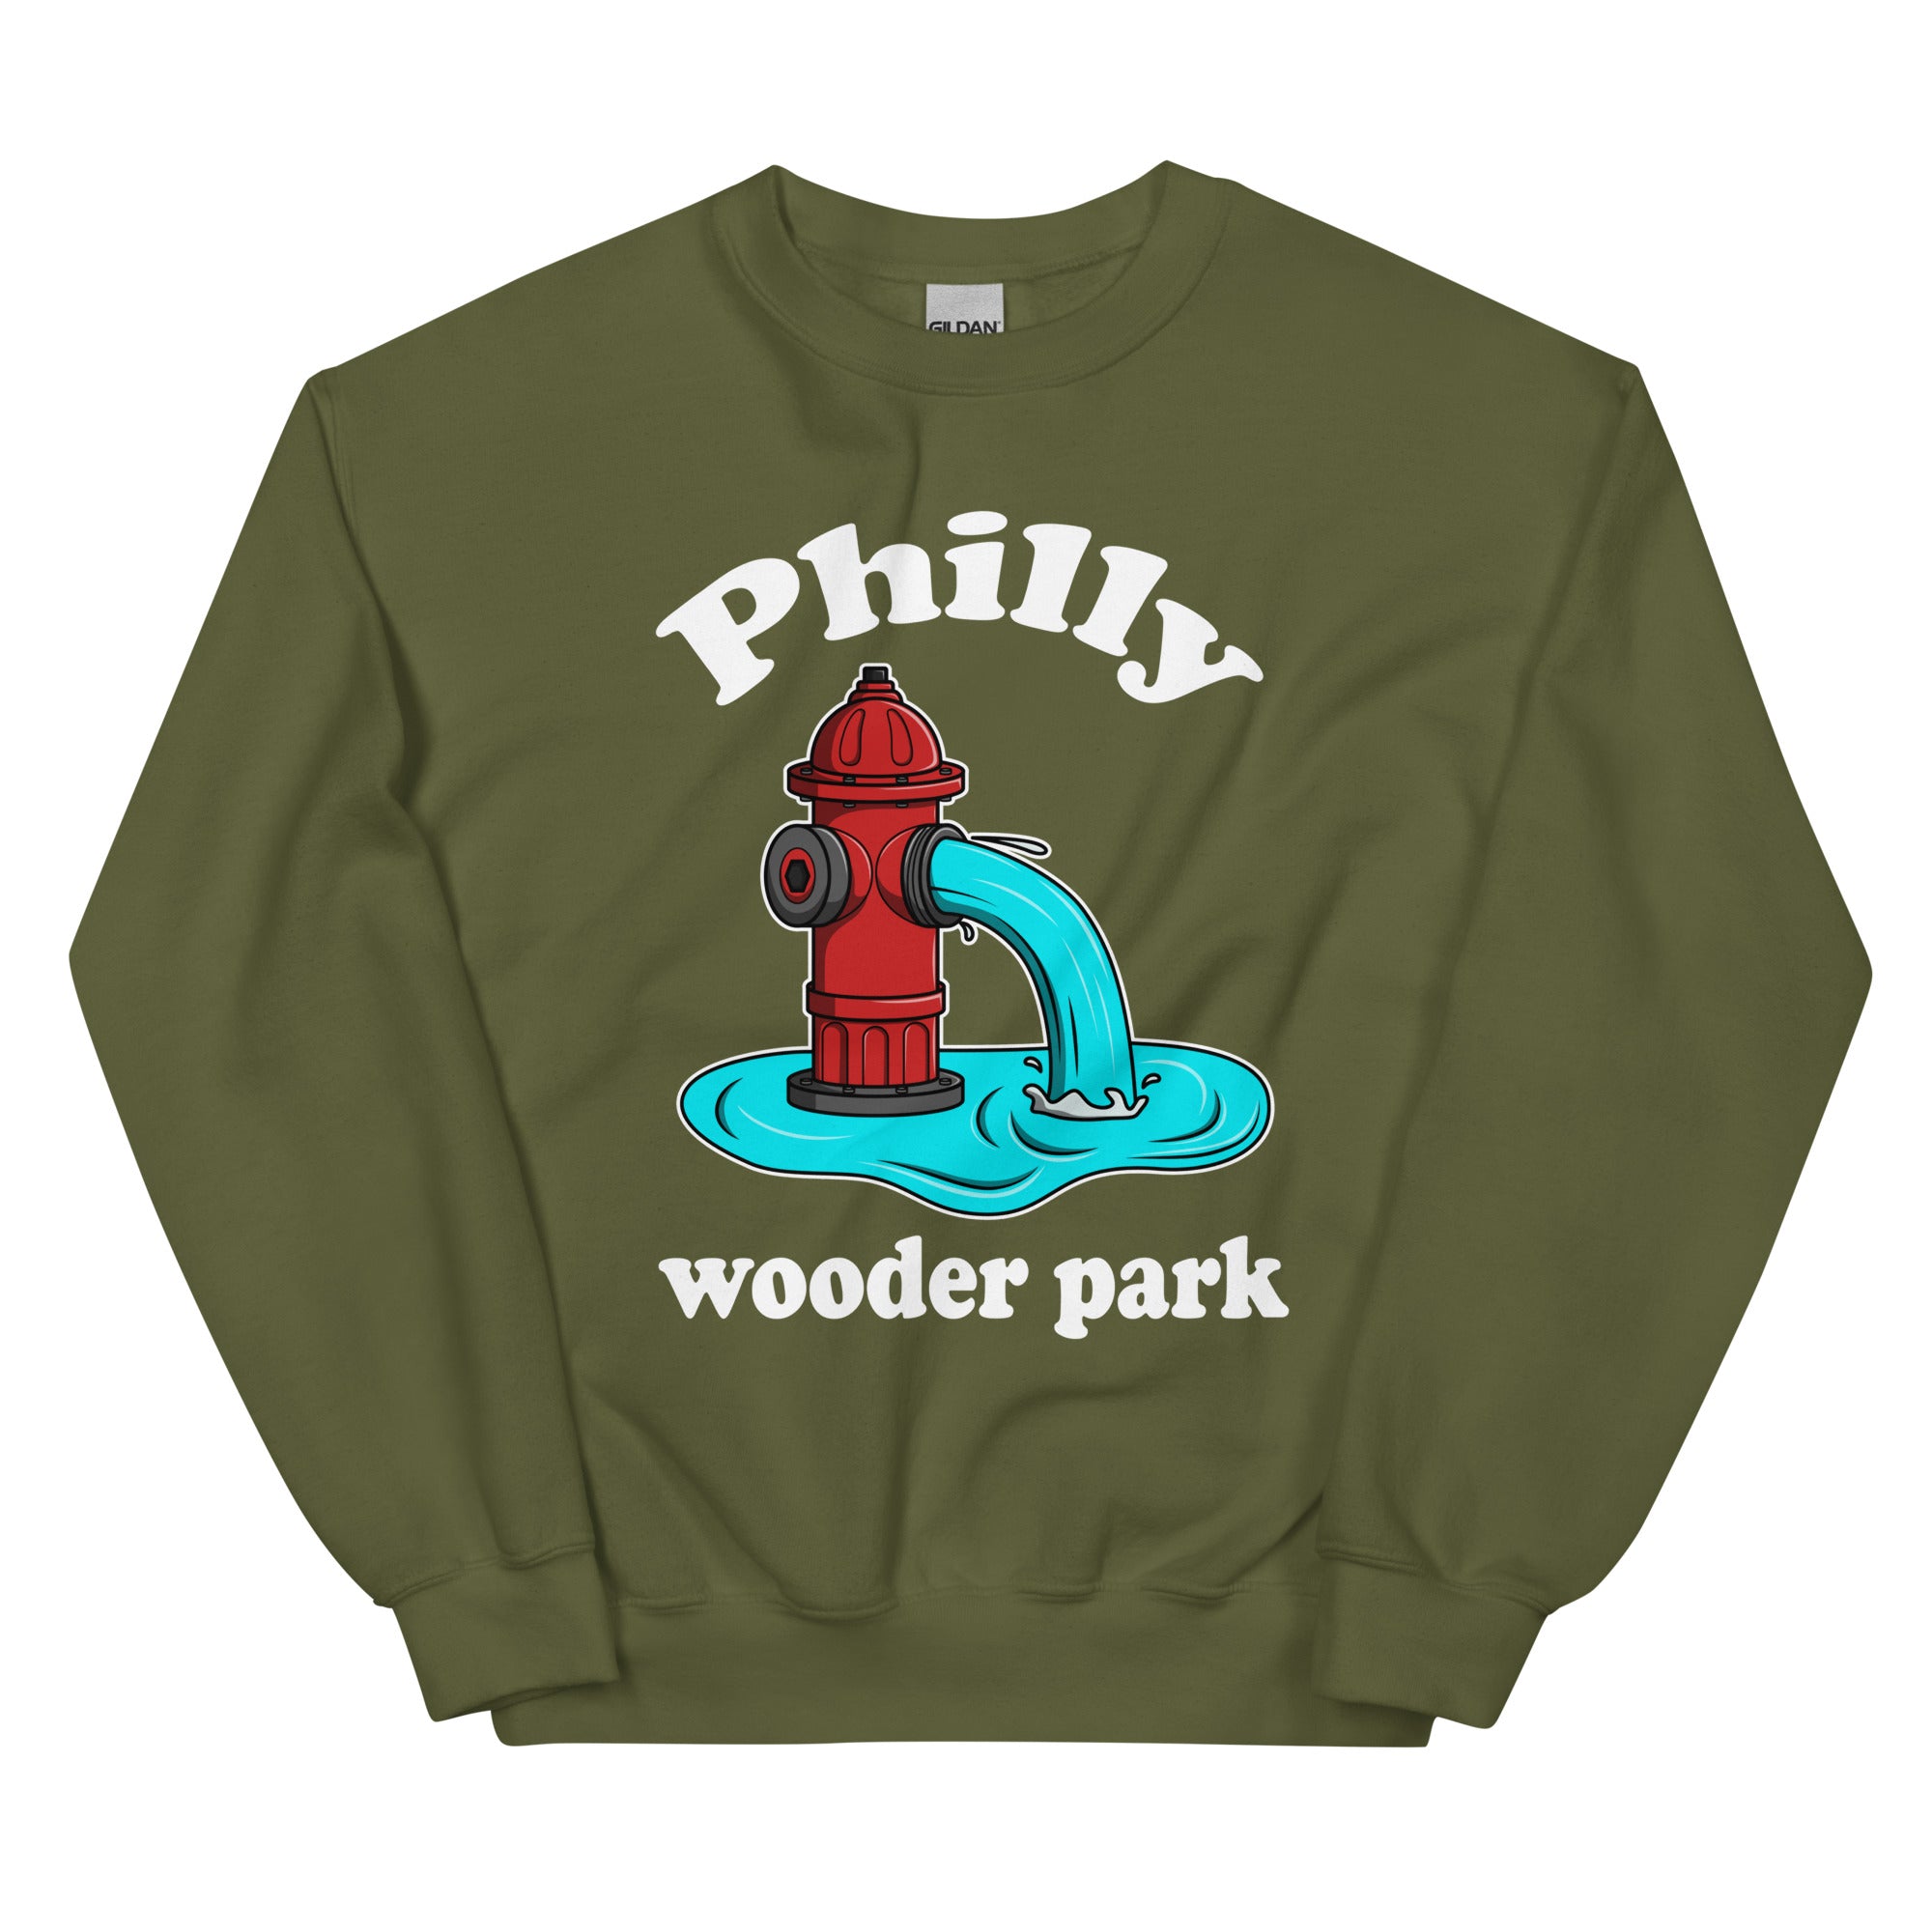 Philadelphia Philly wooder park fire hydrant funny army green sweatshirt Phillygoat